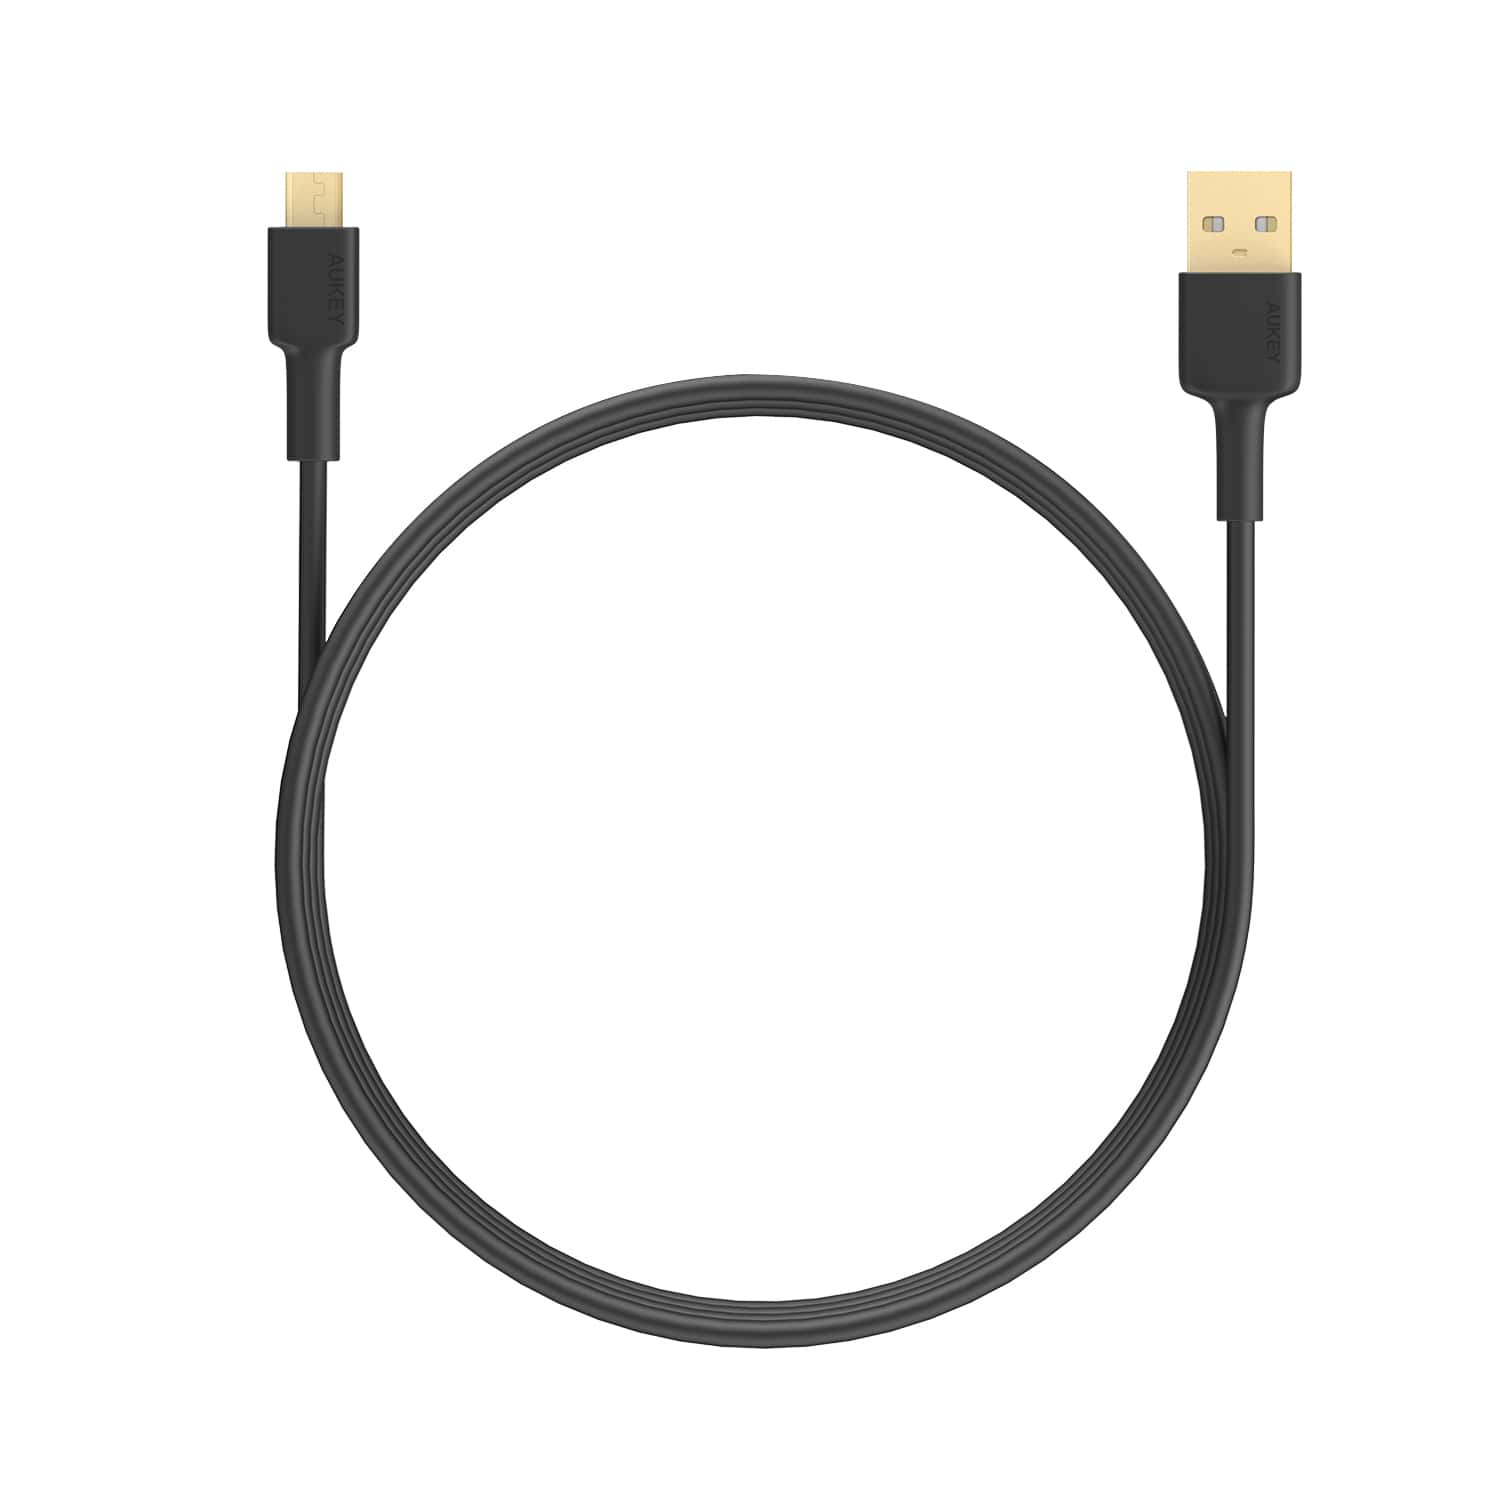 Aukey, USB 2.0 to Micro USB Cable (1m / 3.3ft) - Black -  CB-MD1 BK